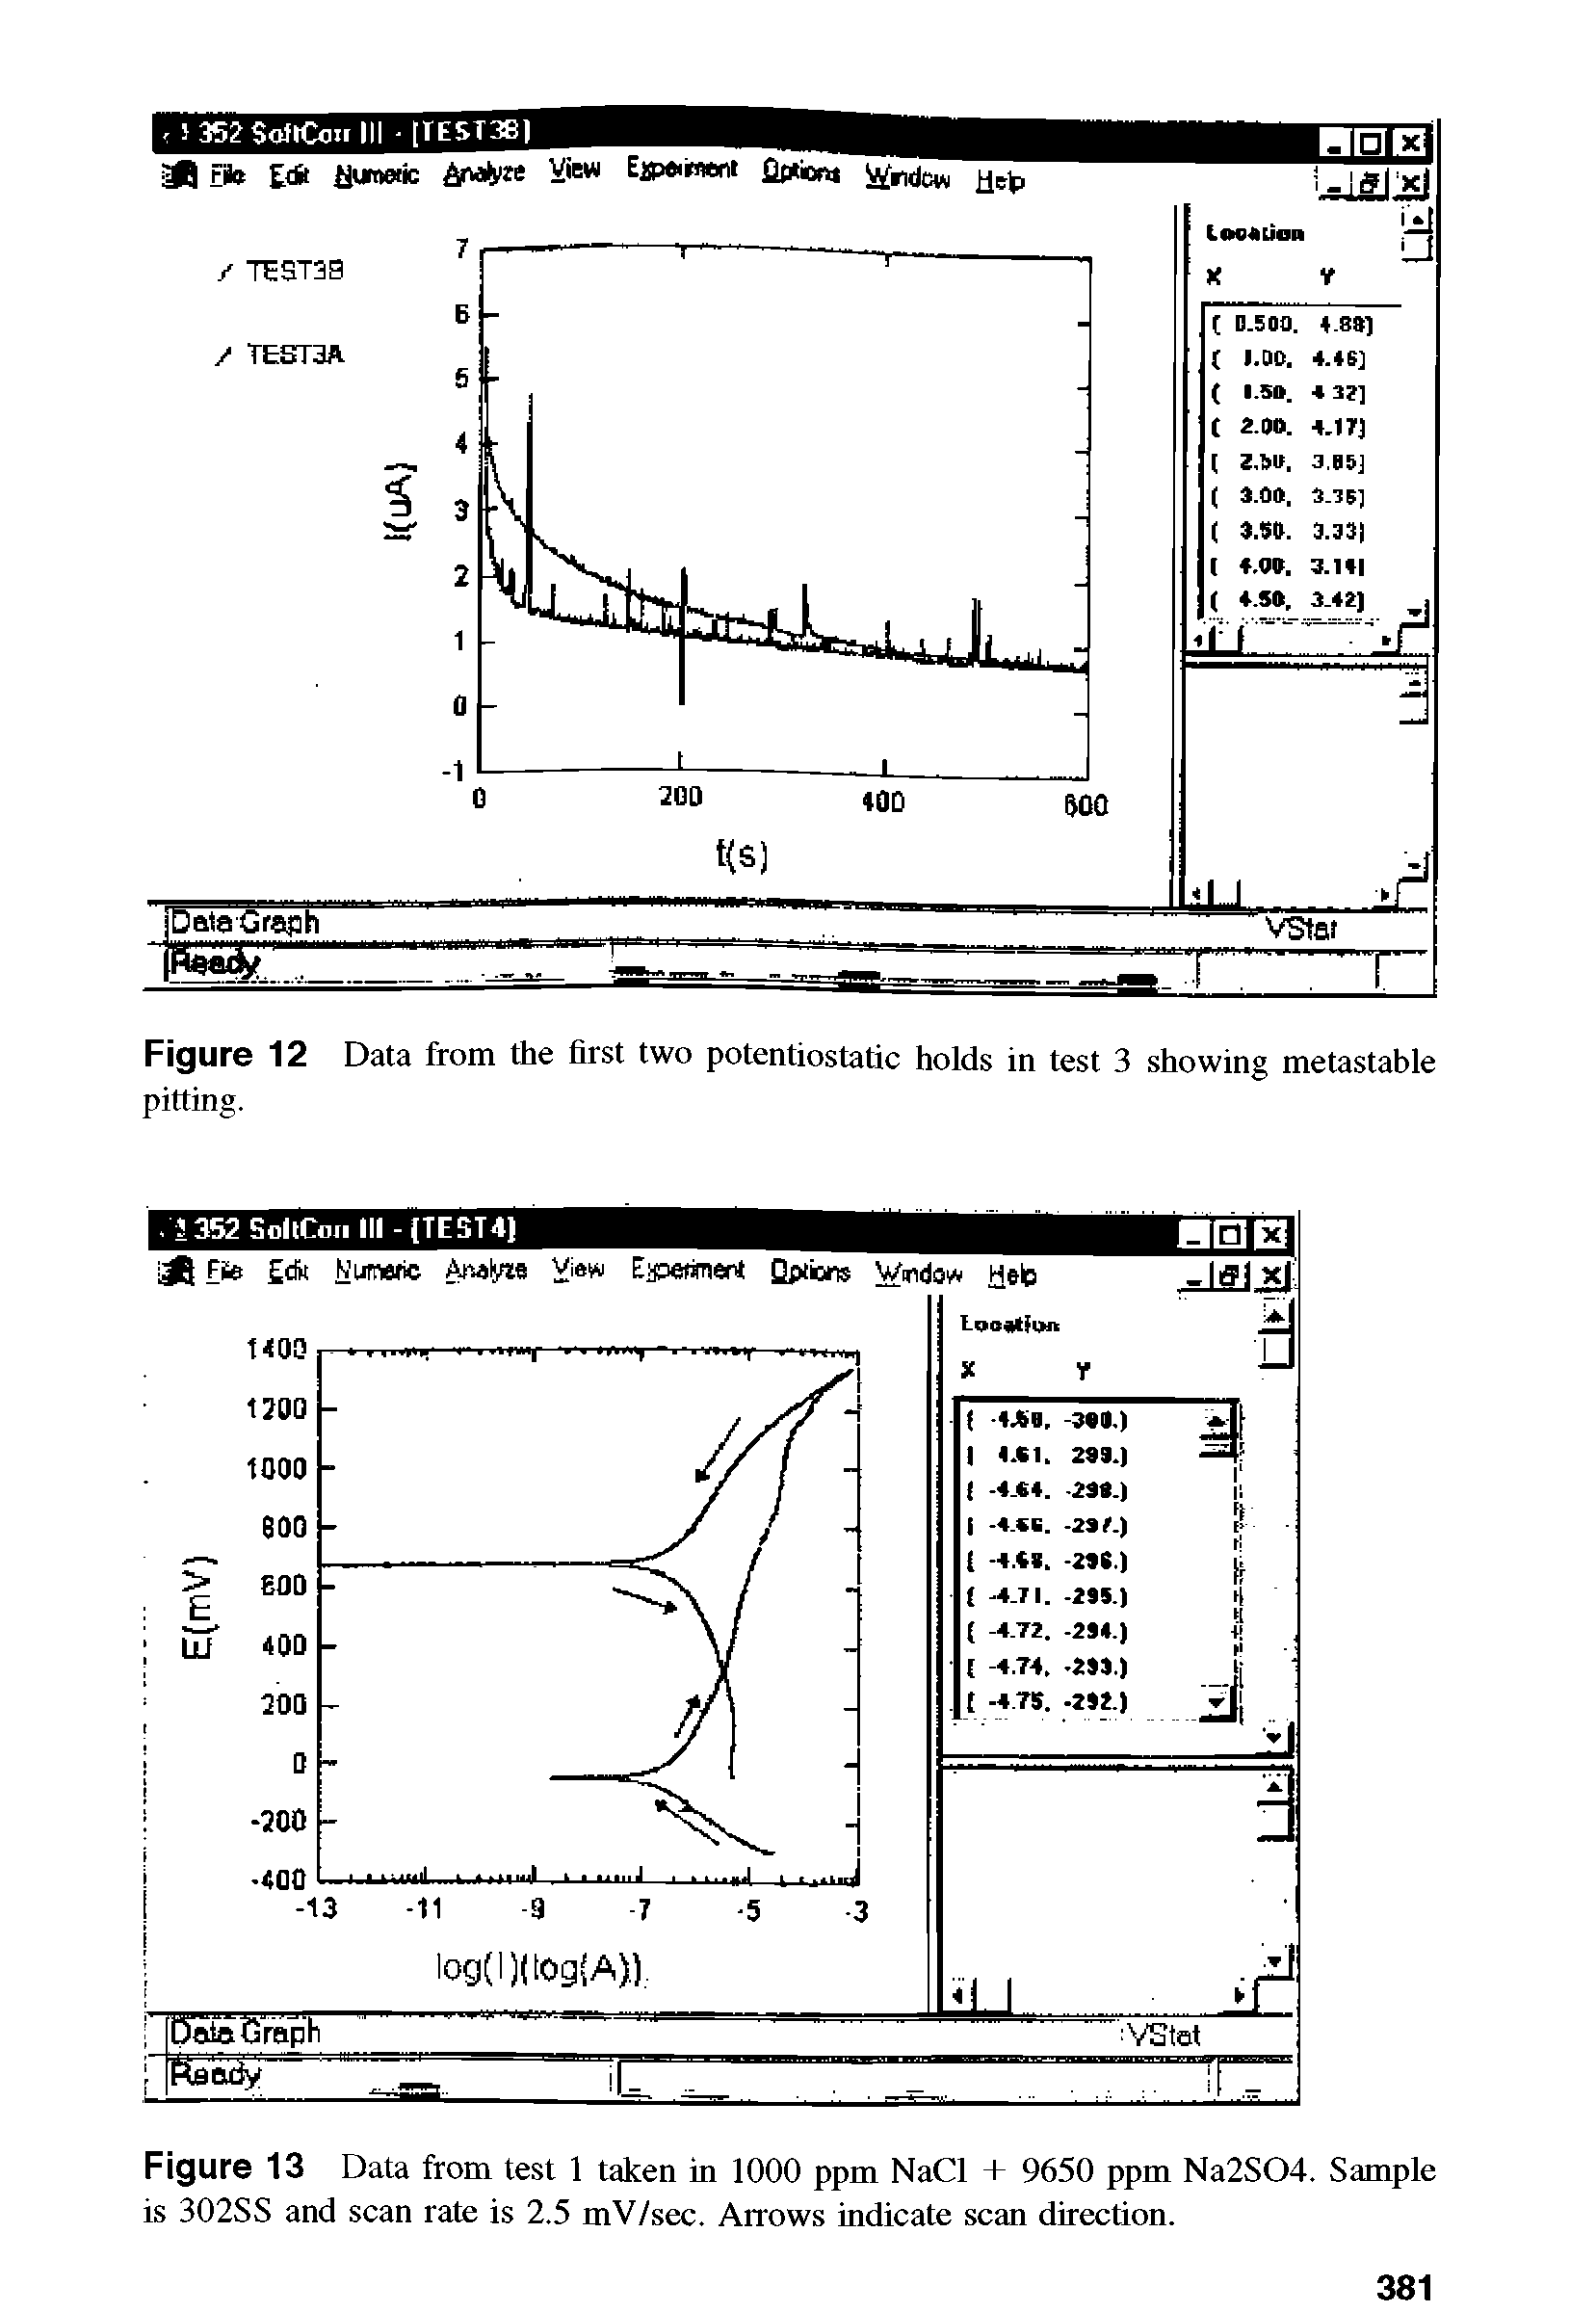 Figure 12 Data from the first two poteatiostatic holds in test 3 showing metastable pitting.